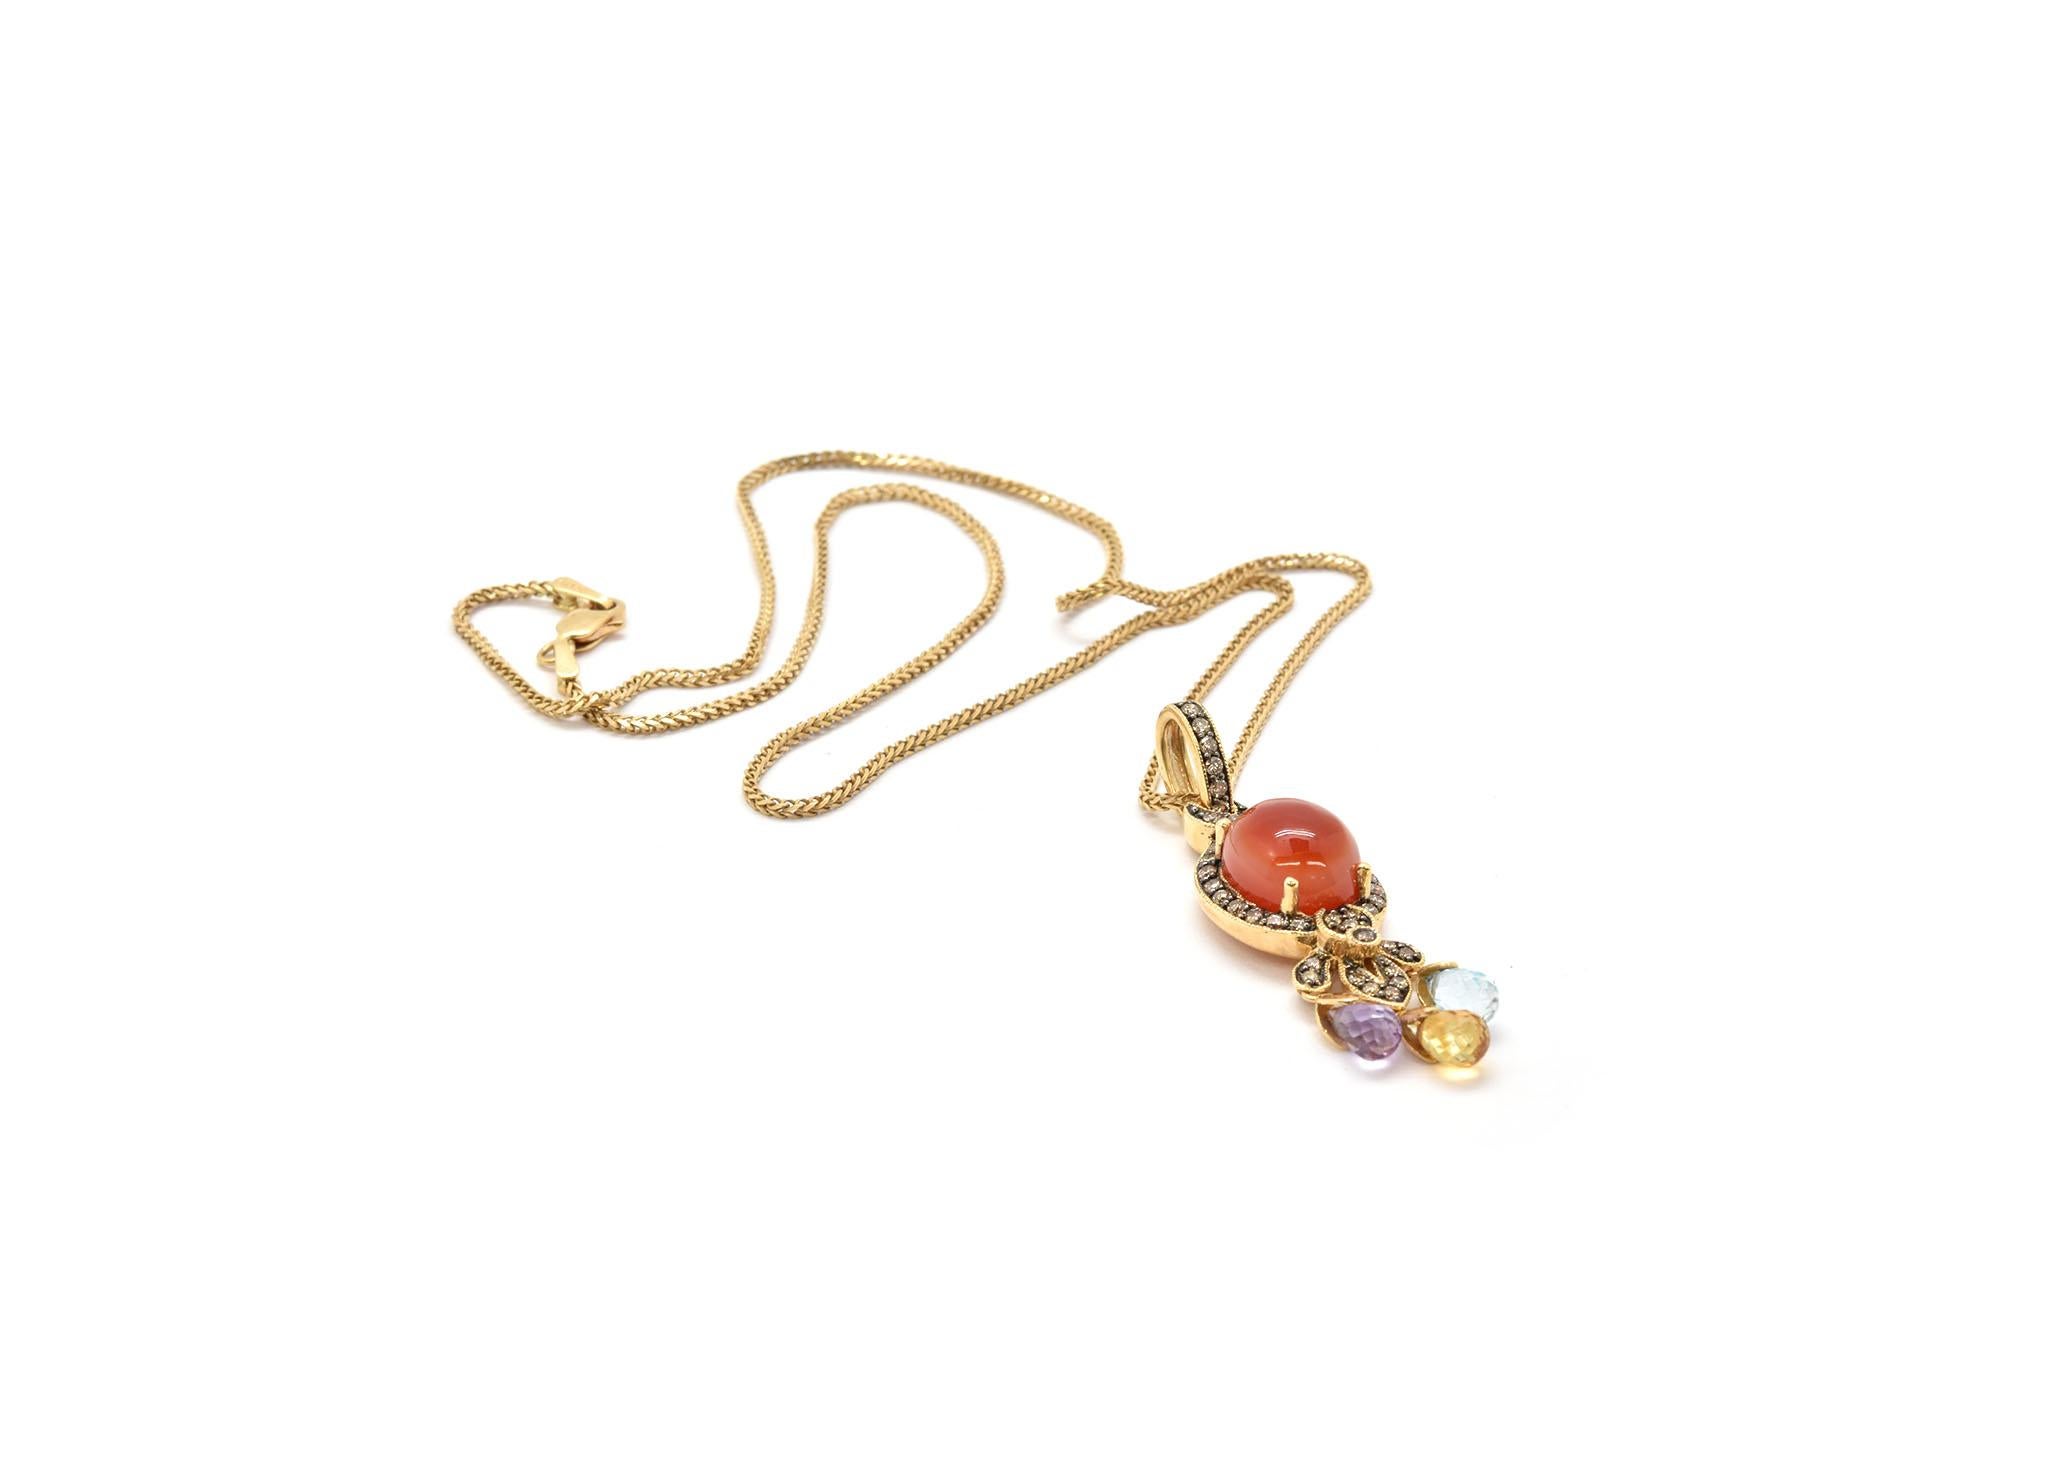 This necklace features a 14k yellow gold and carnelian pendant on a 14k yellow gold chain. The carnelian is surrounded by a bezel of diamonds for a total weight of 0.40ct. The pendant is finished with 3 colored quartz rondelles. The pendant measures